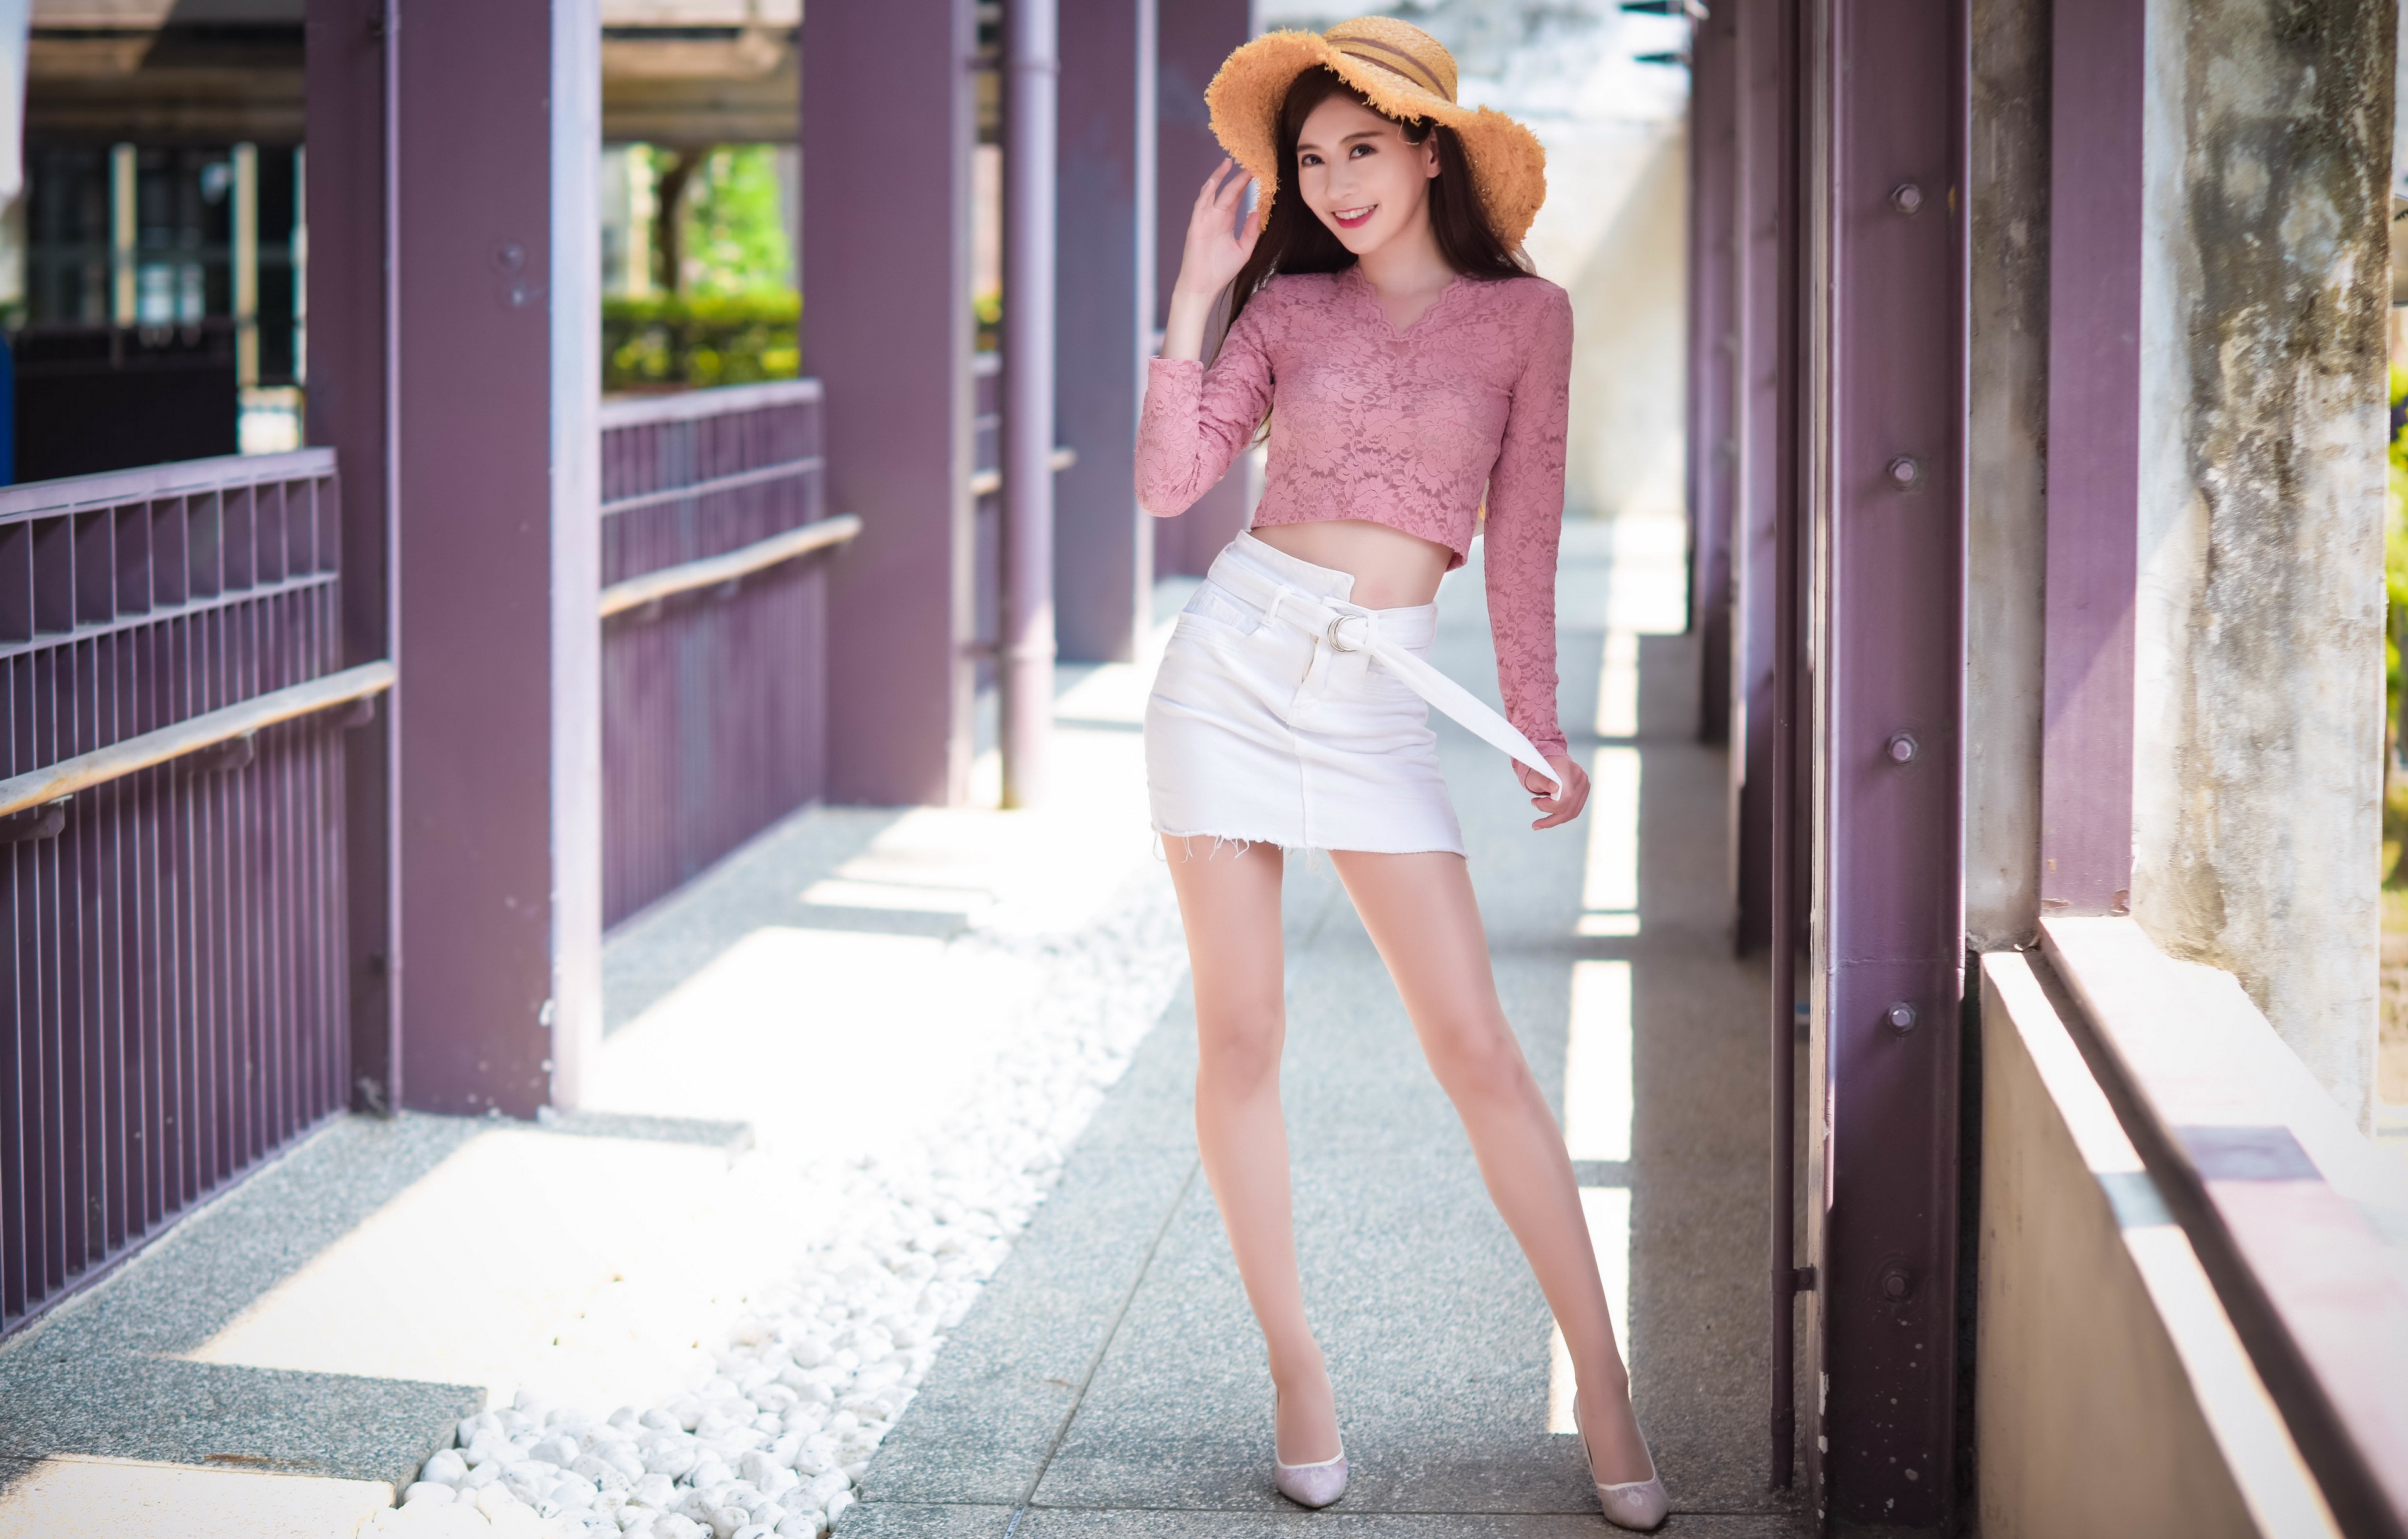 Model Women Asian Hat Women With Hats Smiling Legs Standing Looking At Viewer Skirt Pink Tops Slim B 3840x2454